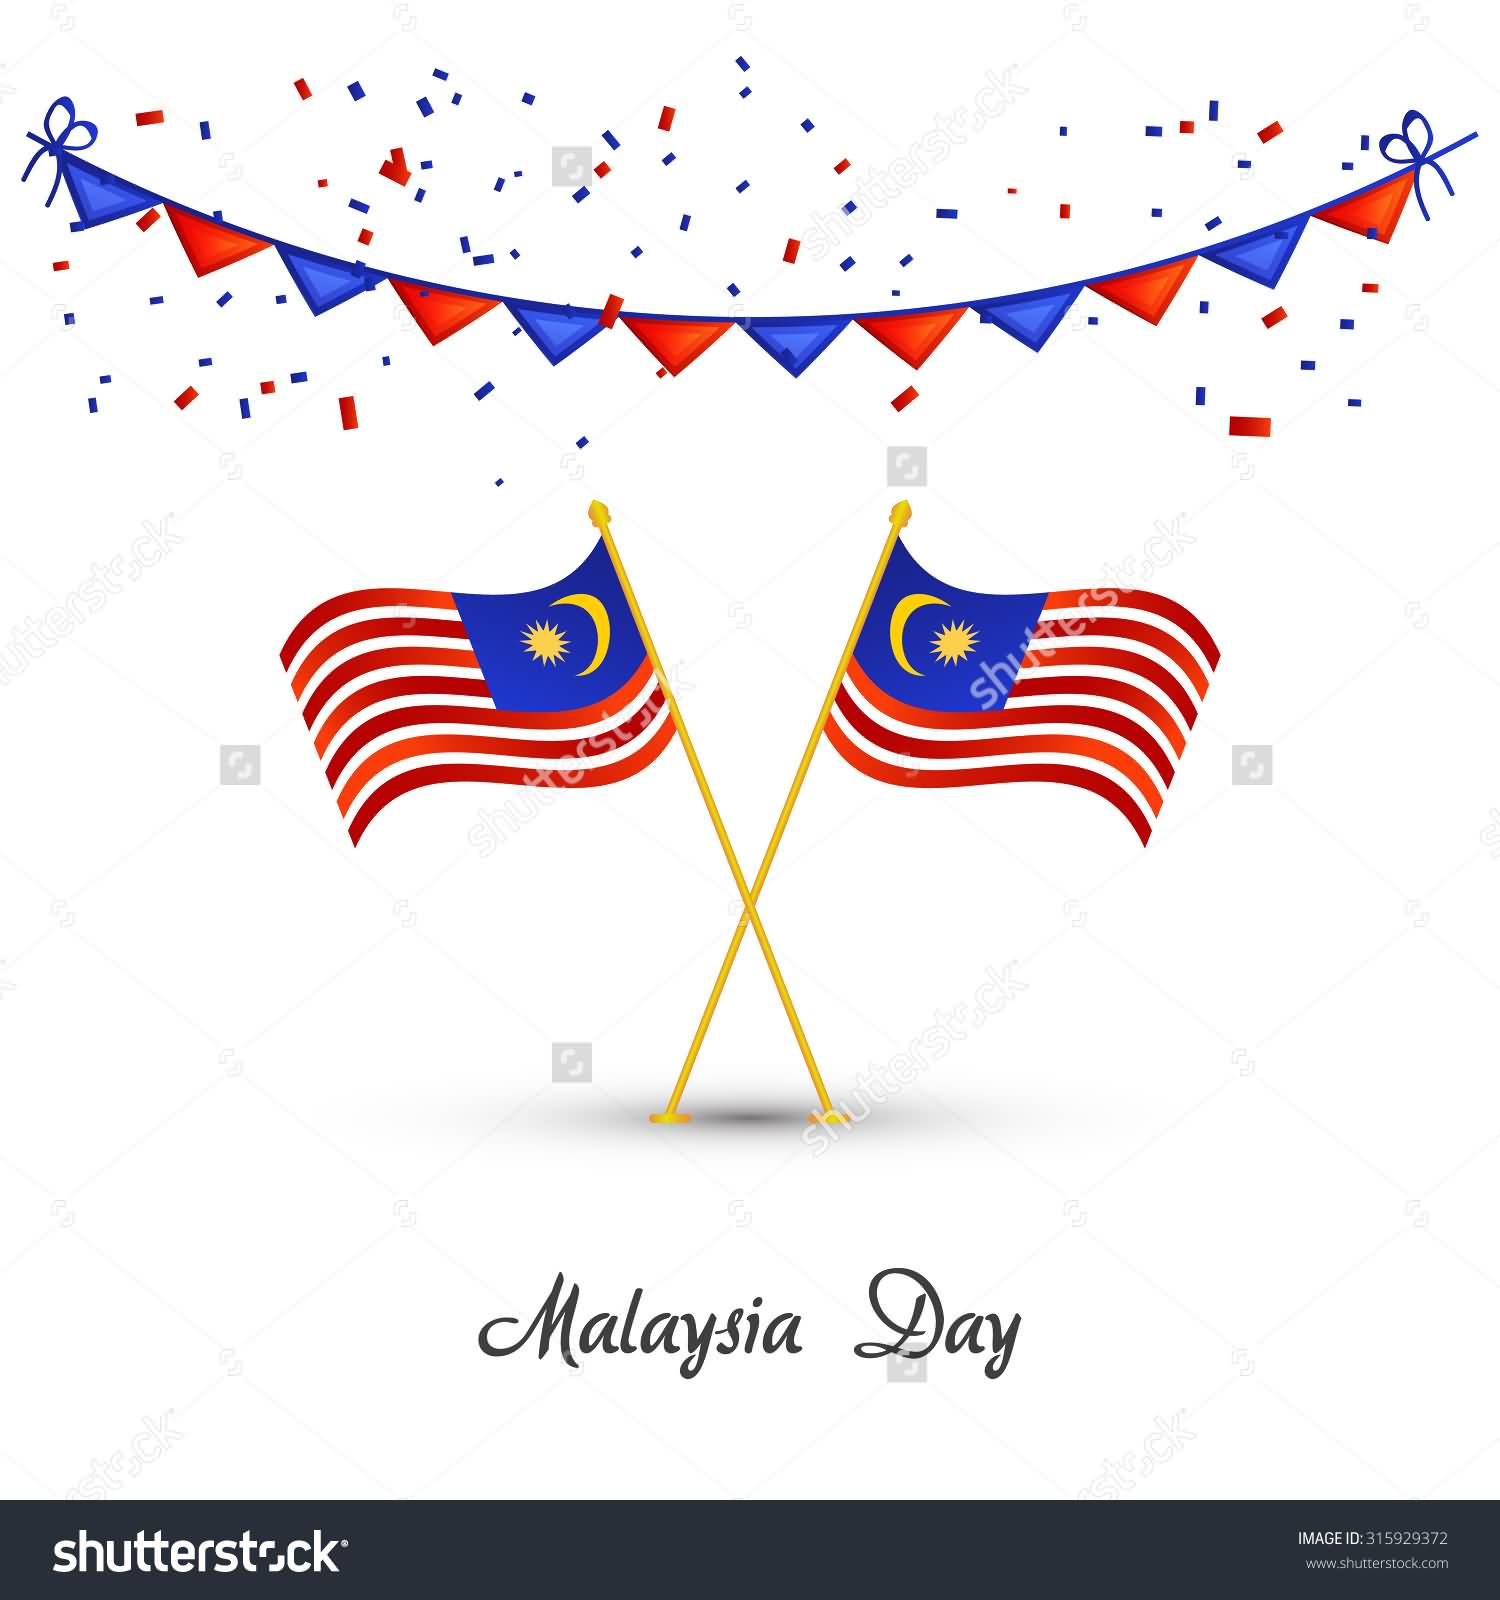 Malaysia Day Cross Flags And Banner Illustratio